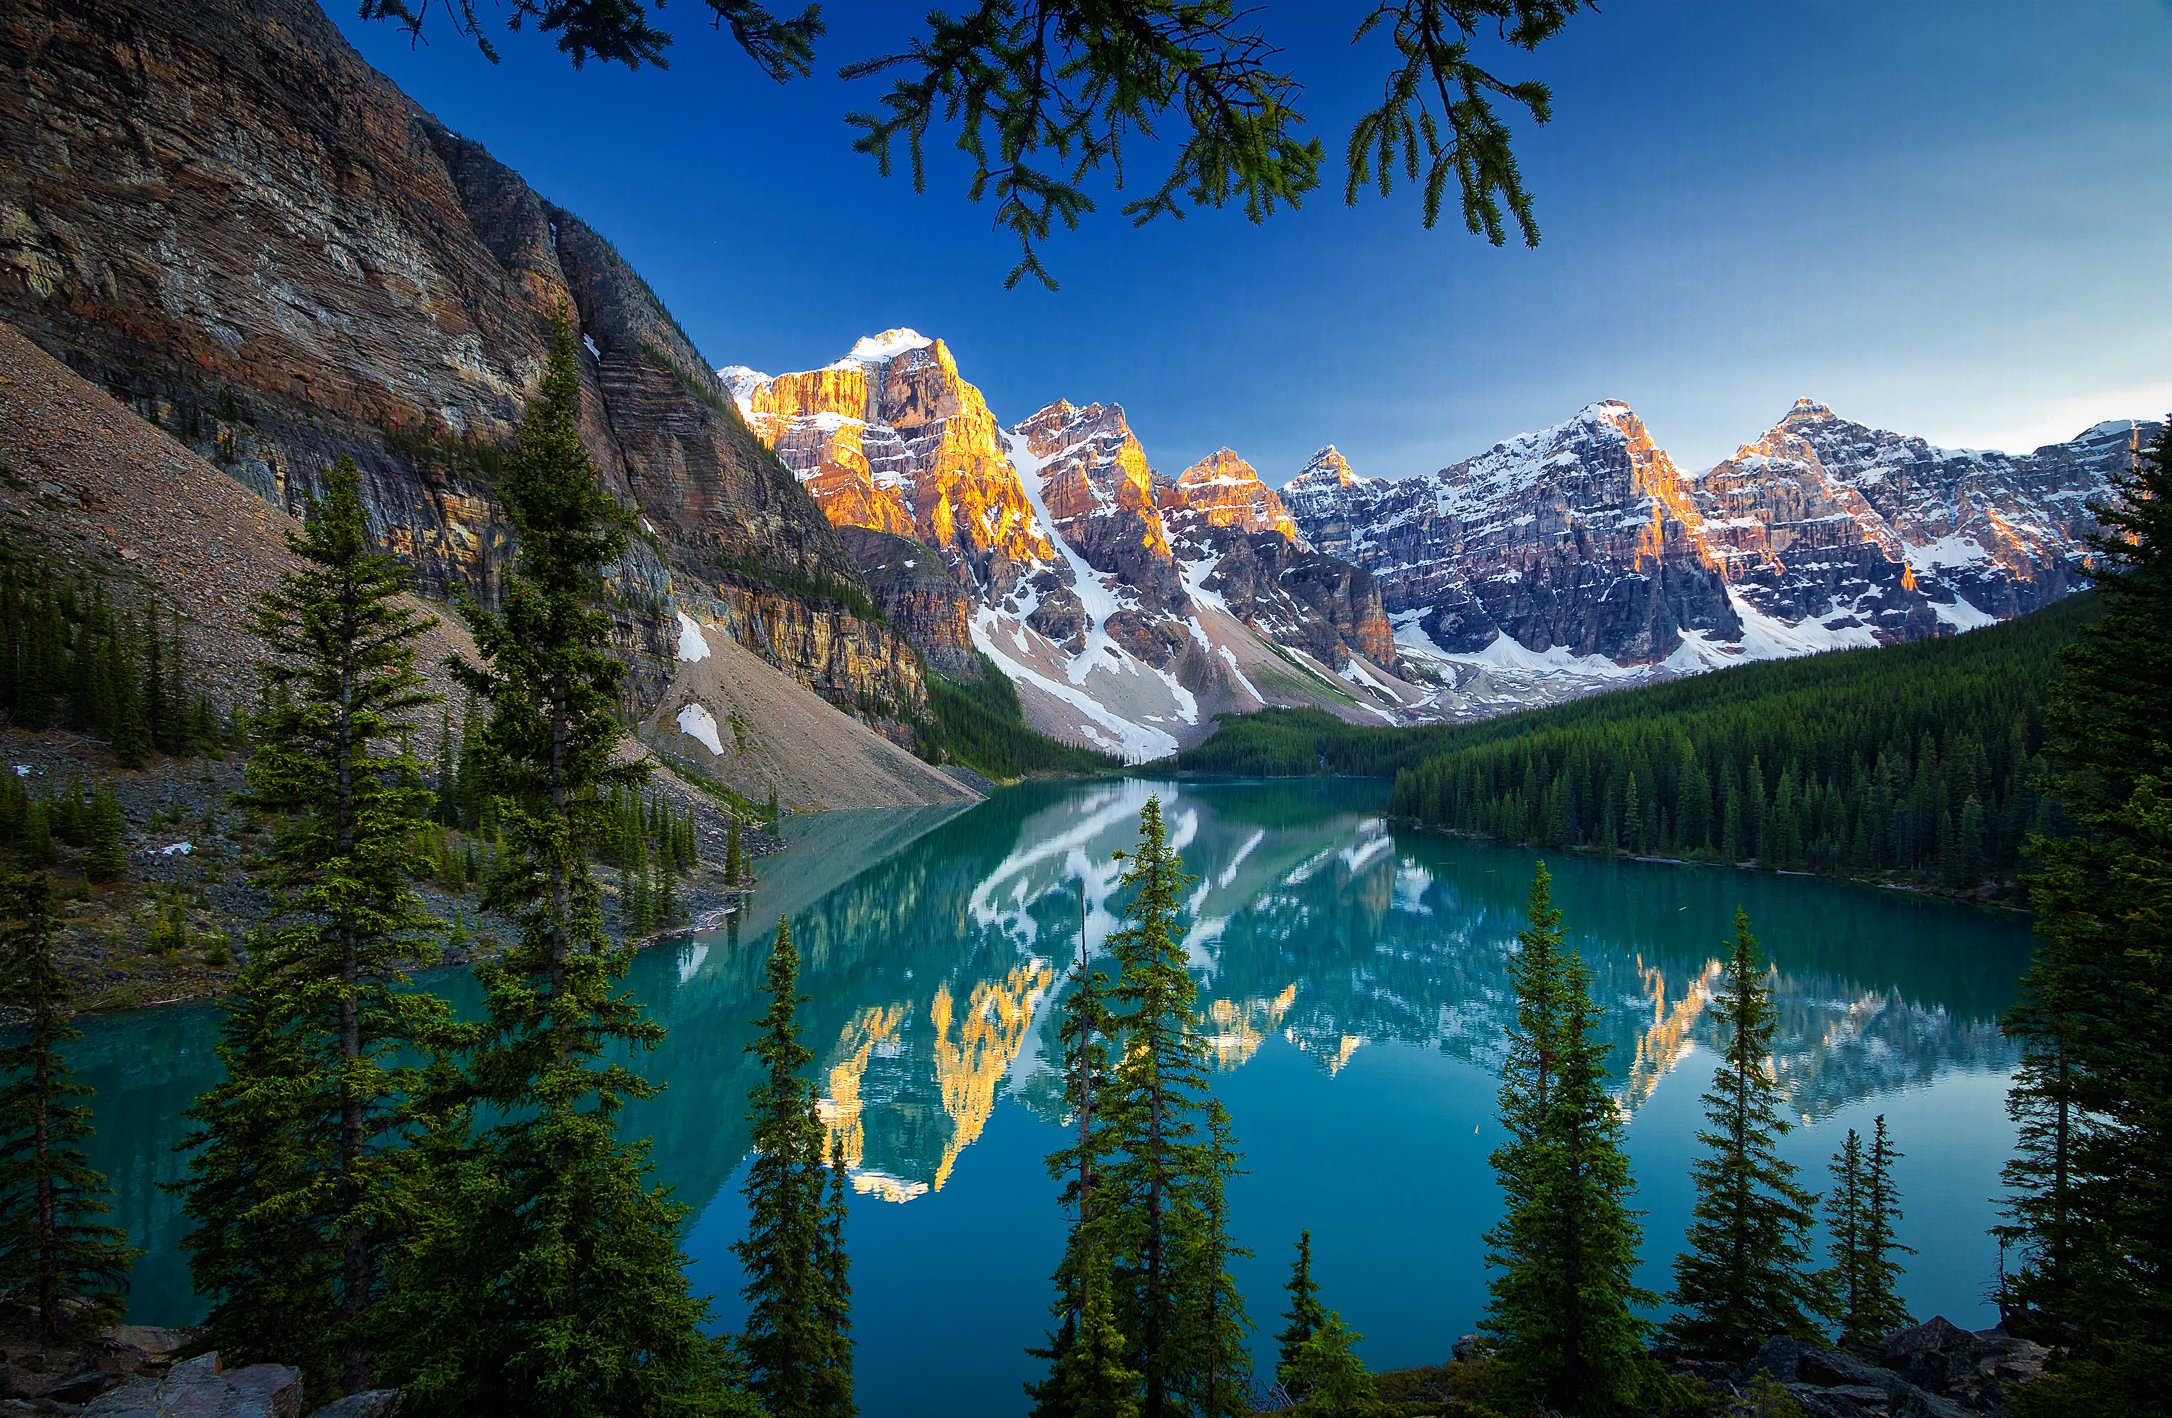 canada, Mountains, Scenery, Lake, Forests, Banff, Moraine ...